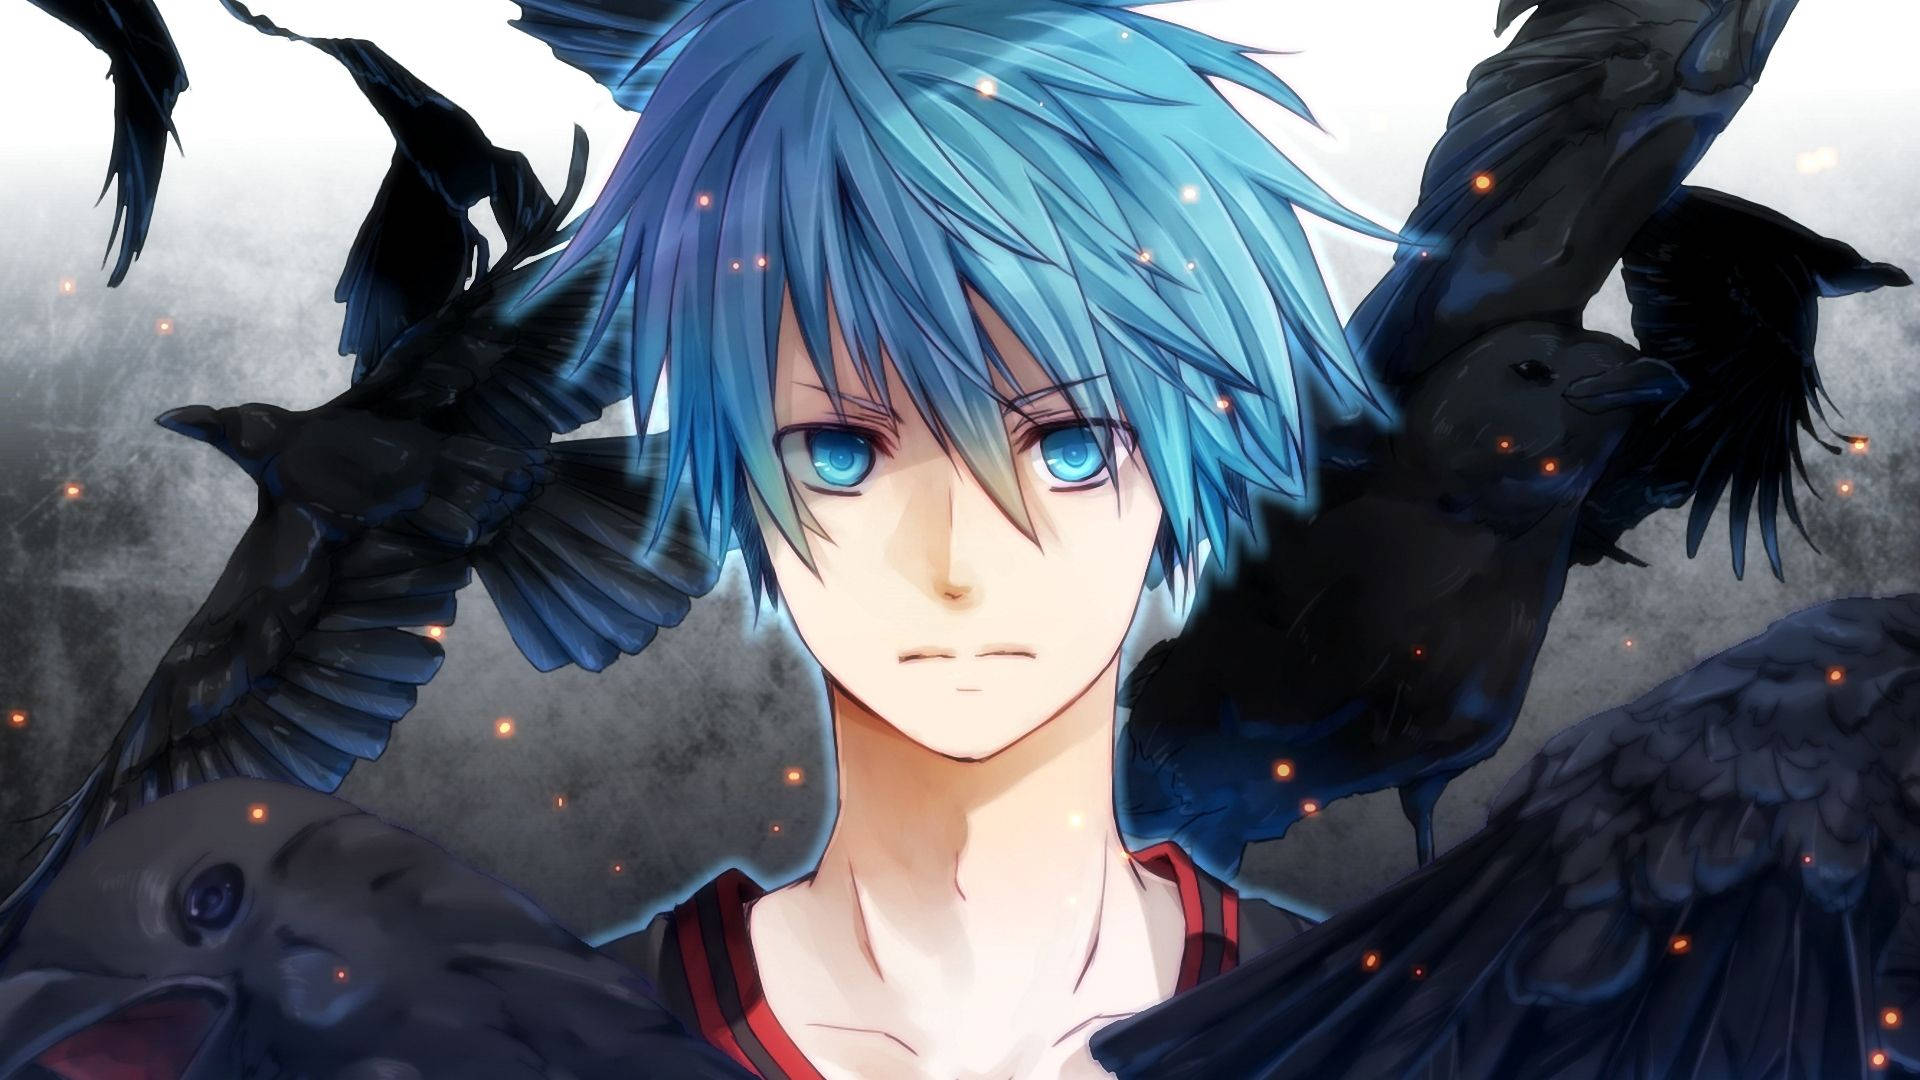 A mystical blue-eyed anime boy stares with a haunting gaze. Wallpaper